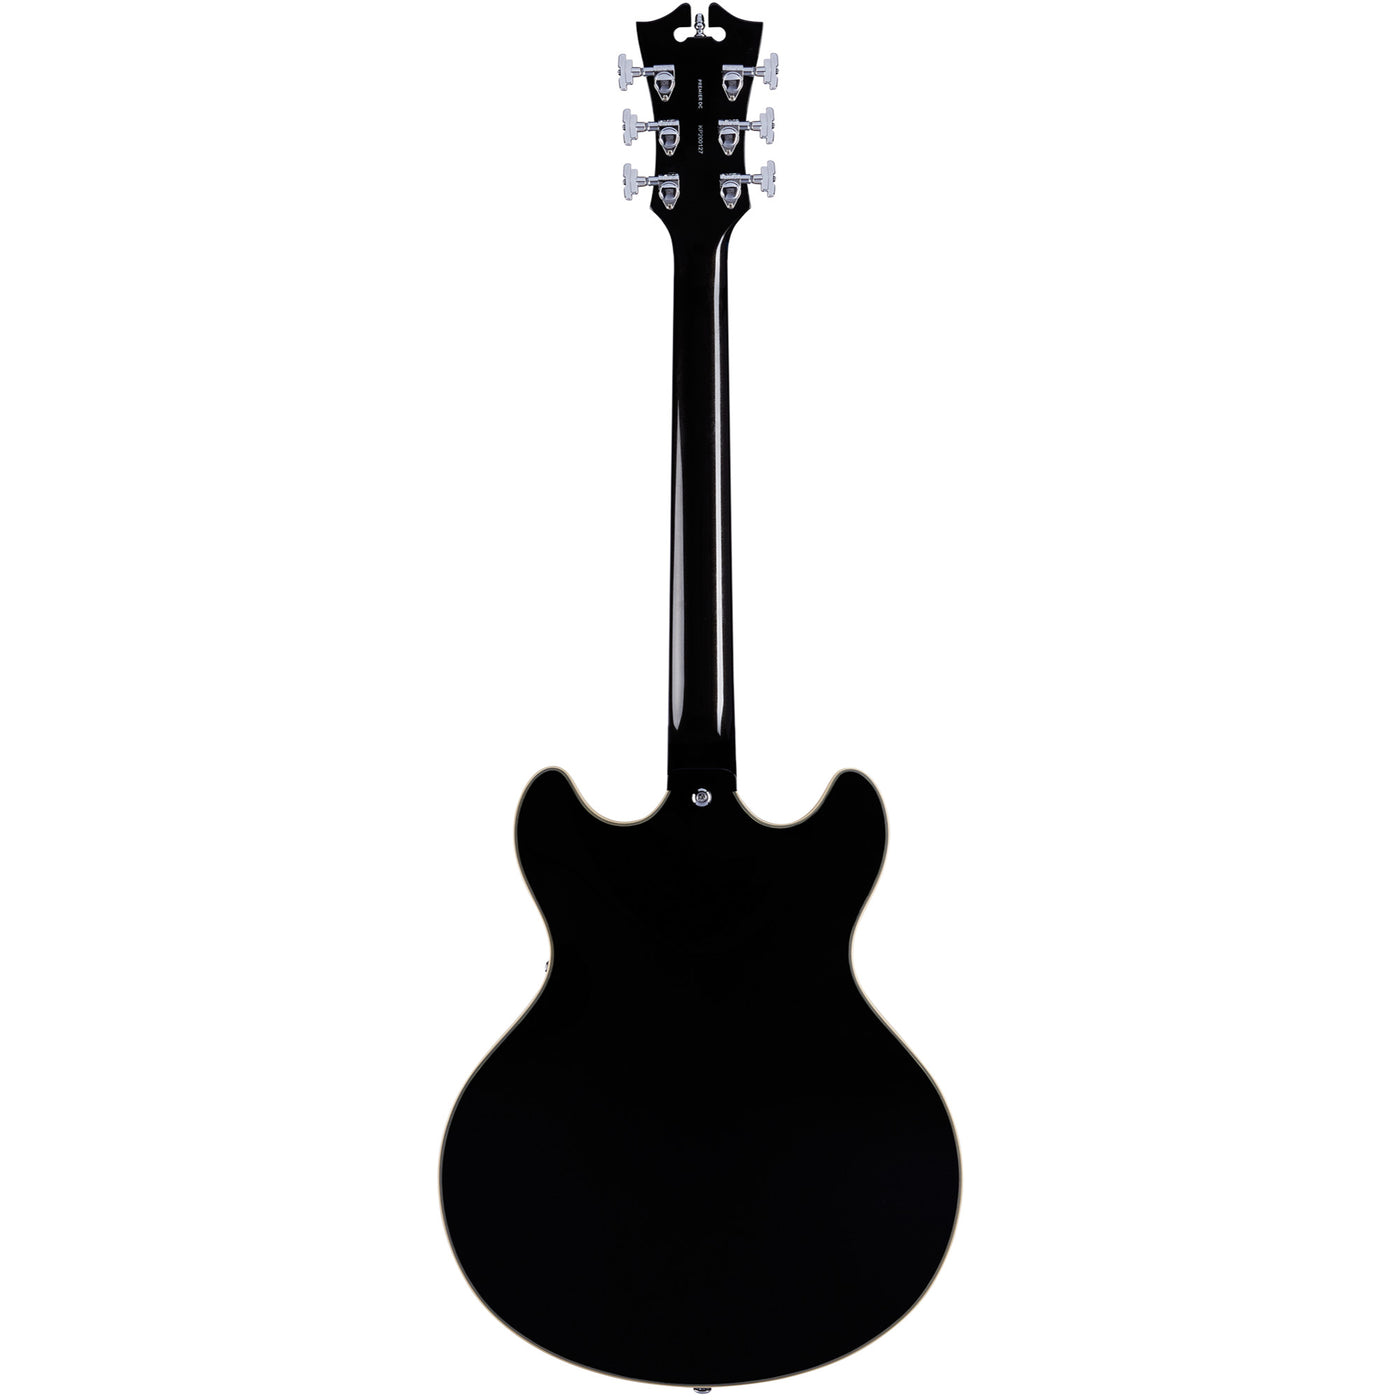 D’Angelico Premier DC Electric Guitar with Stopbar Tailpiece, Black Flake (DAPDCBLFCS)